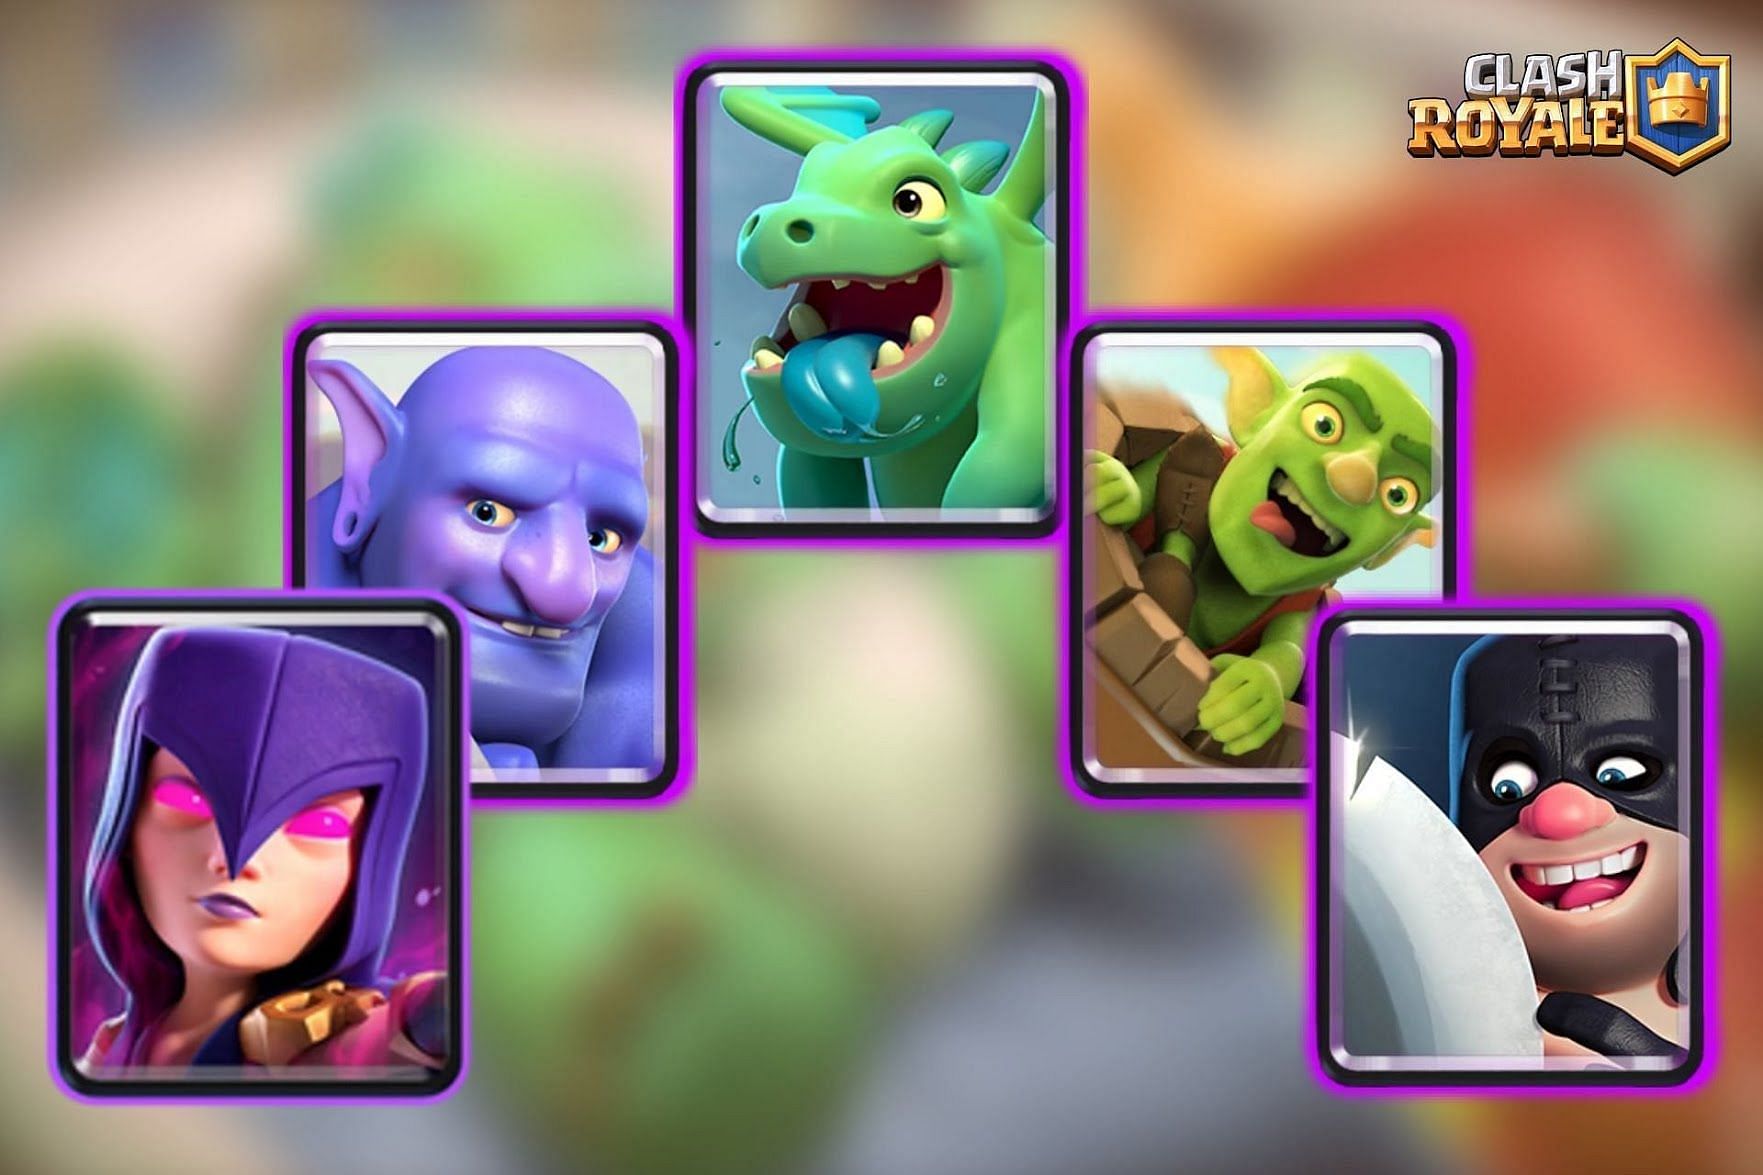 Epic Cards for Royal Tournament in Clash Royale (Image via Sportskeeda)